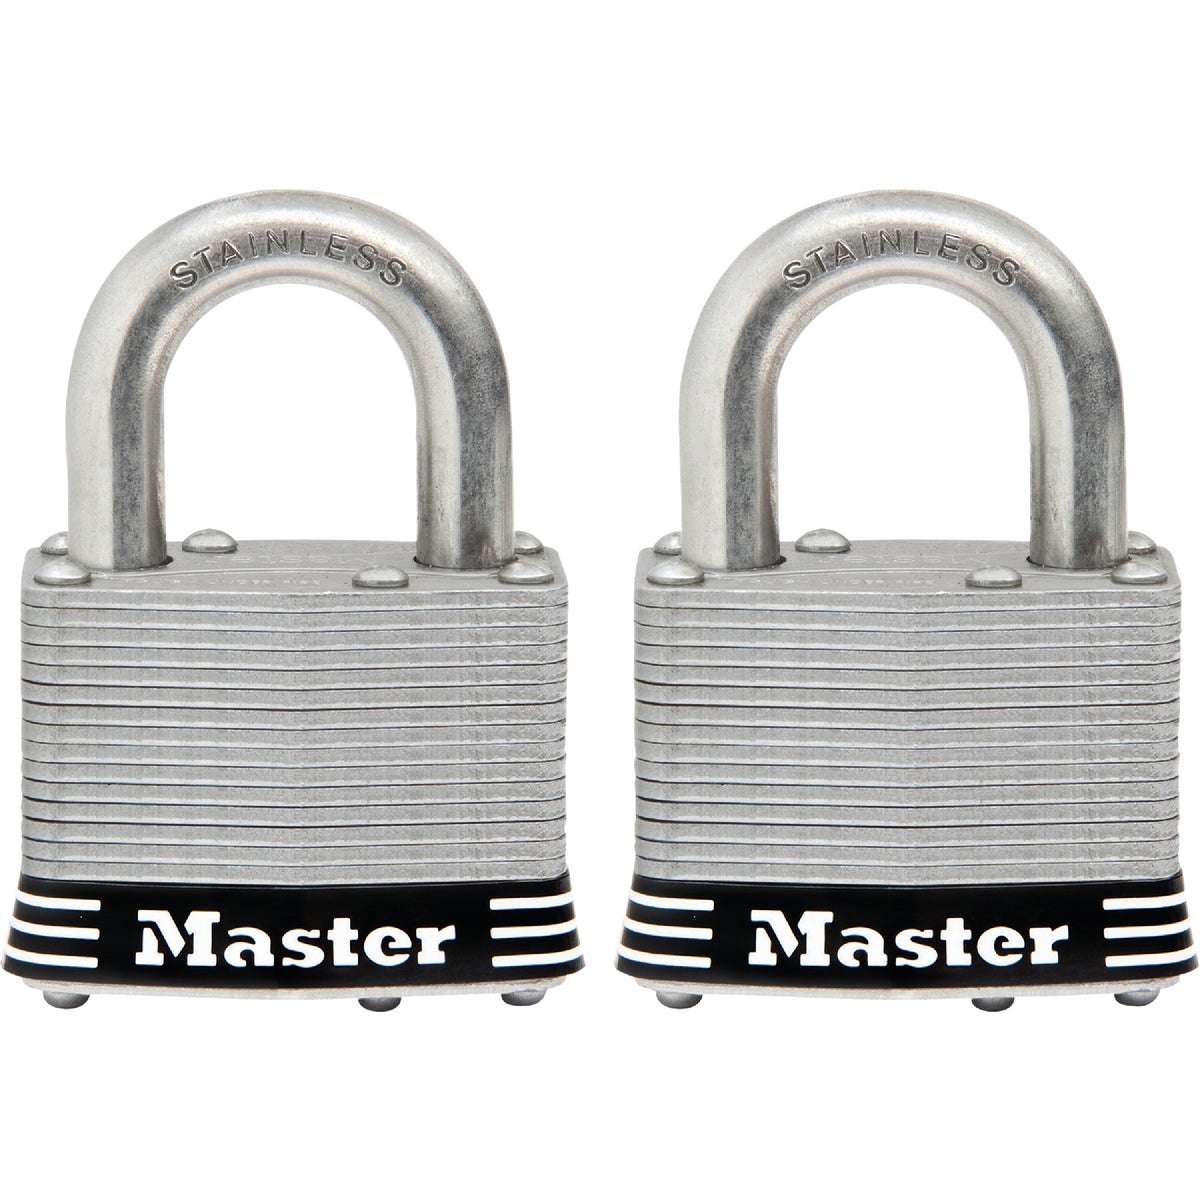 Master Lock 2 In. Laminated Stainless Steel Keyed Padlock with 1 In. Shackle (2-Pack)